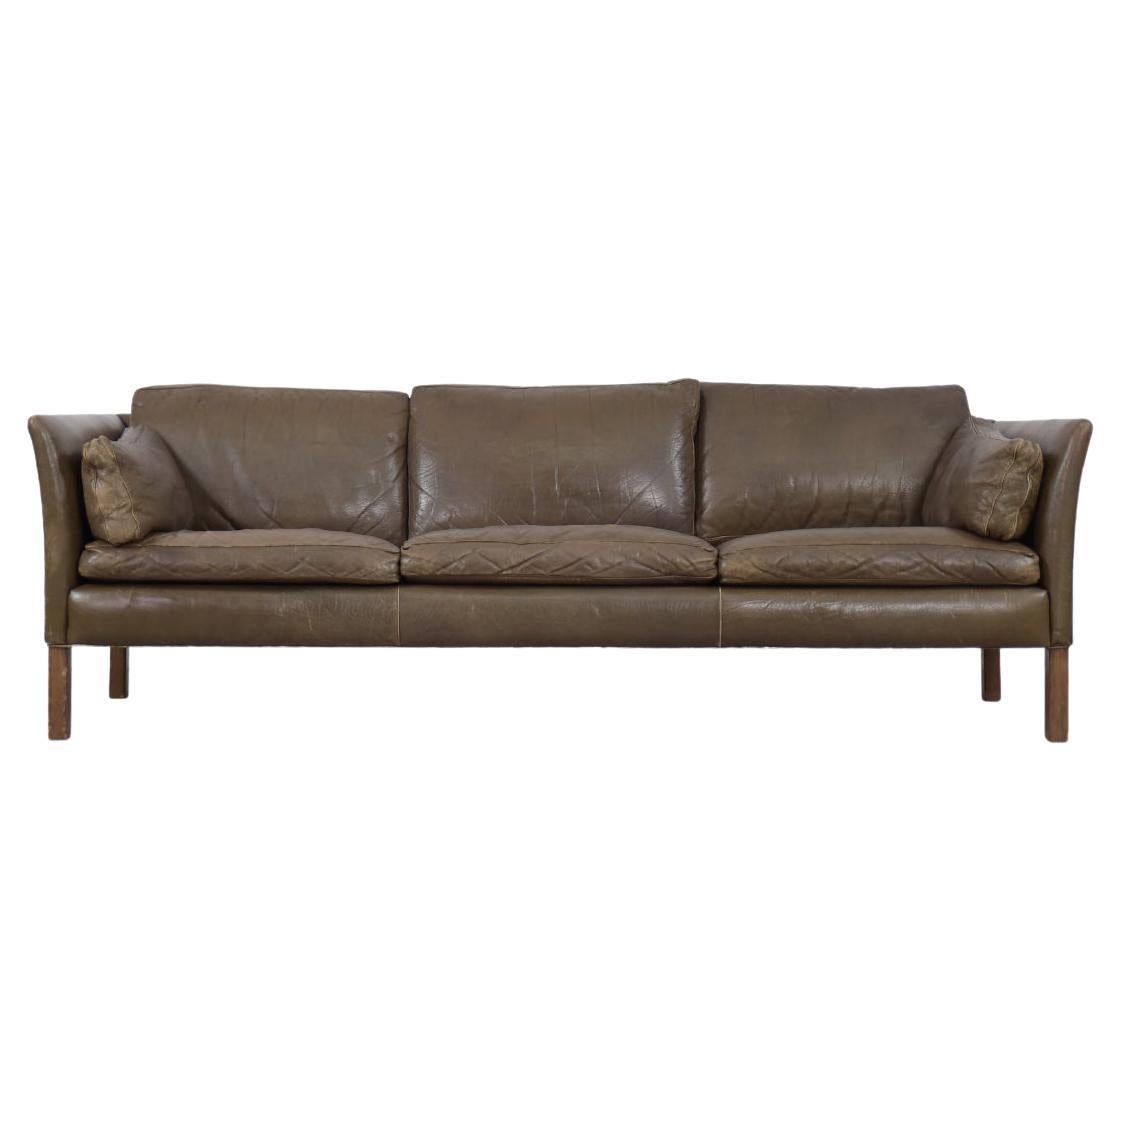 Mid-Century Modern Vintage Leather Cromwell Sofa by Arne Norell, 1960s